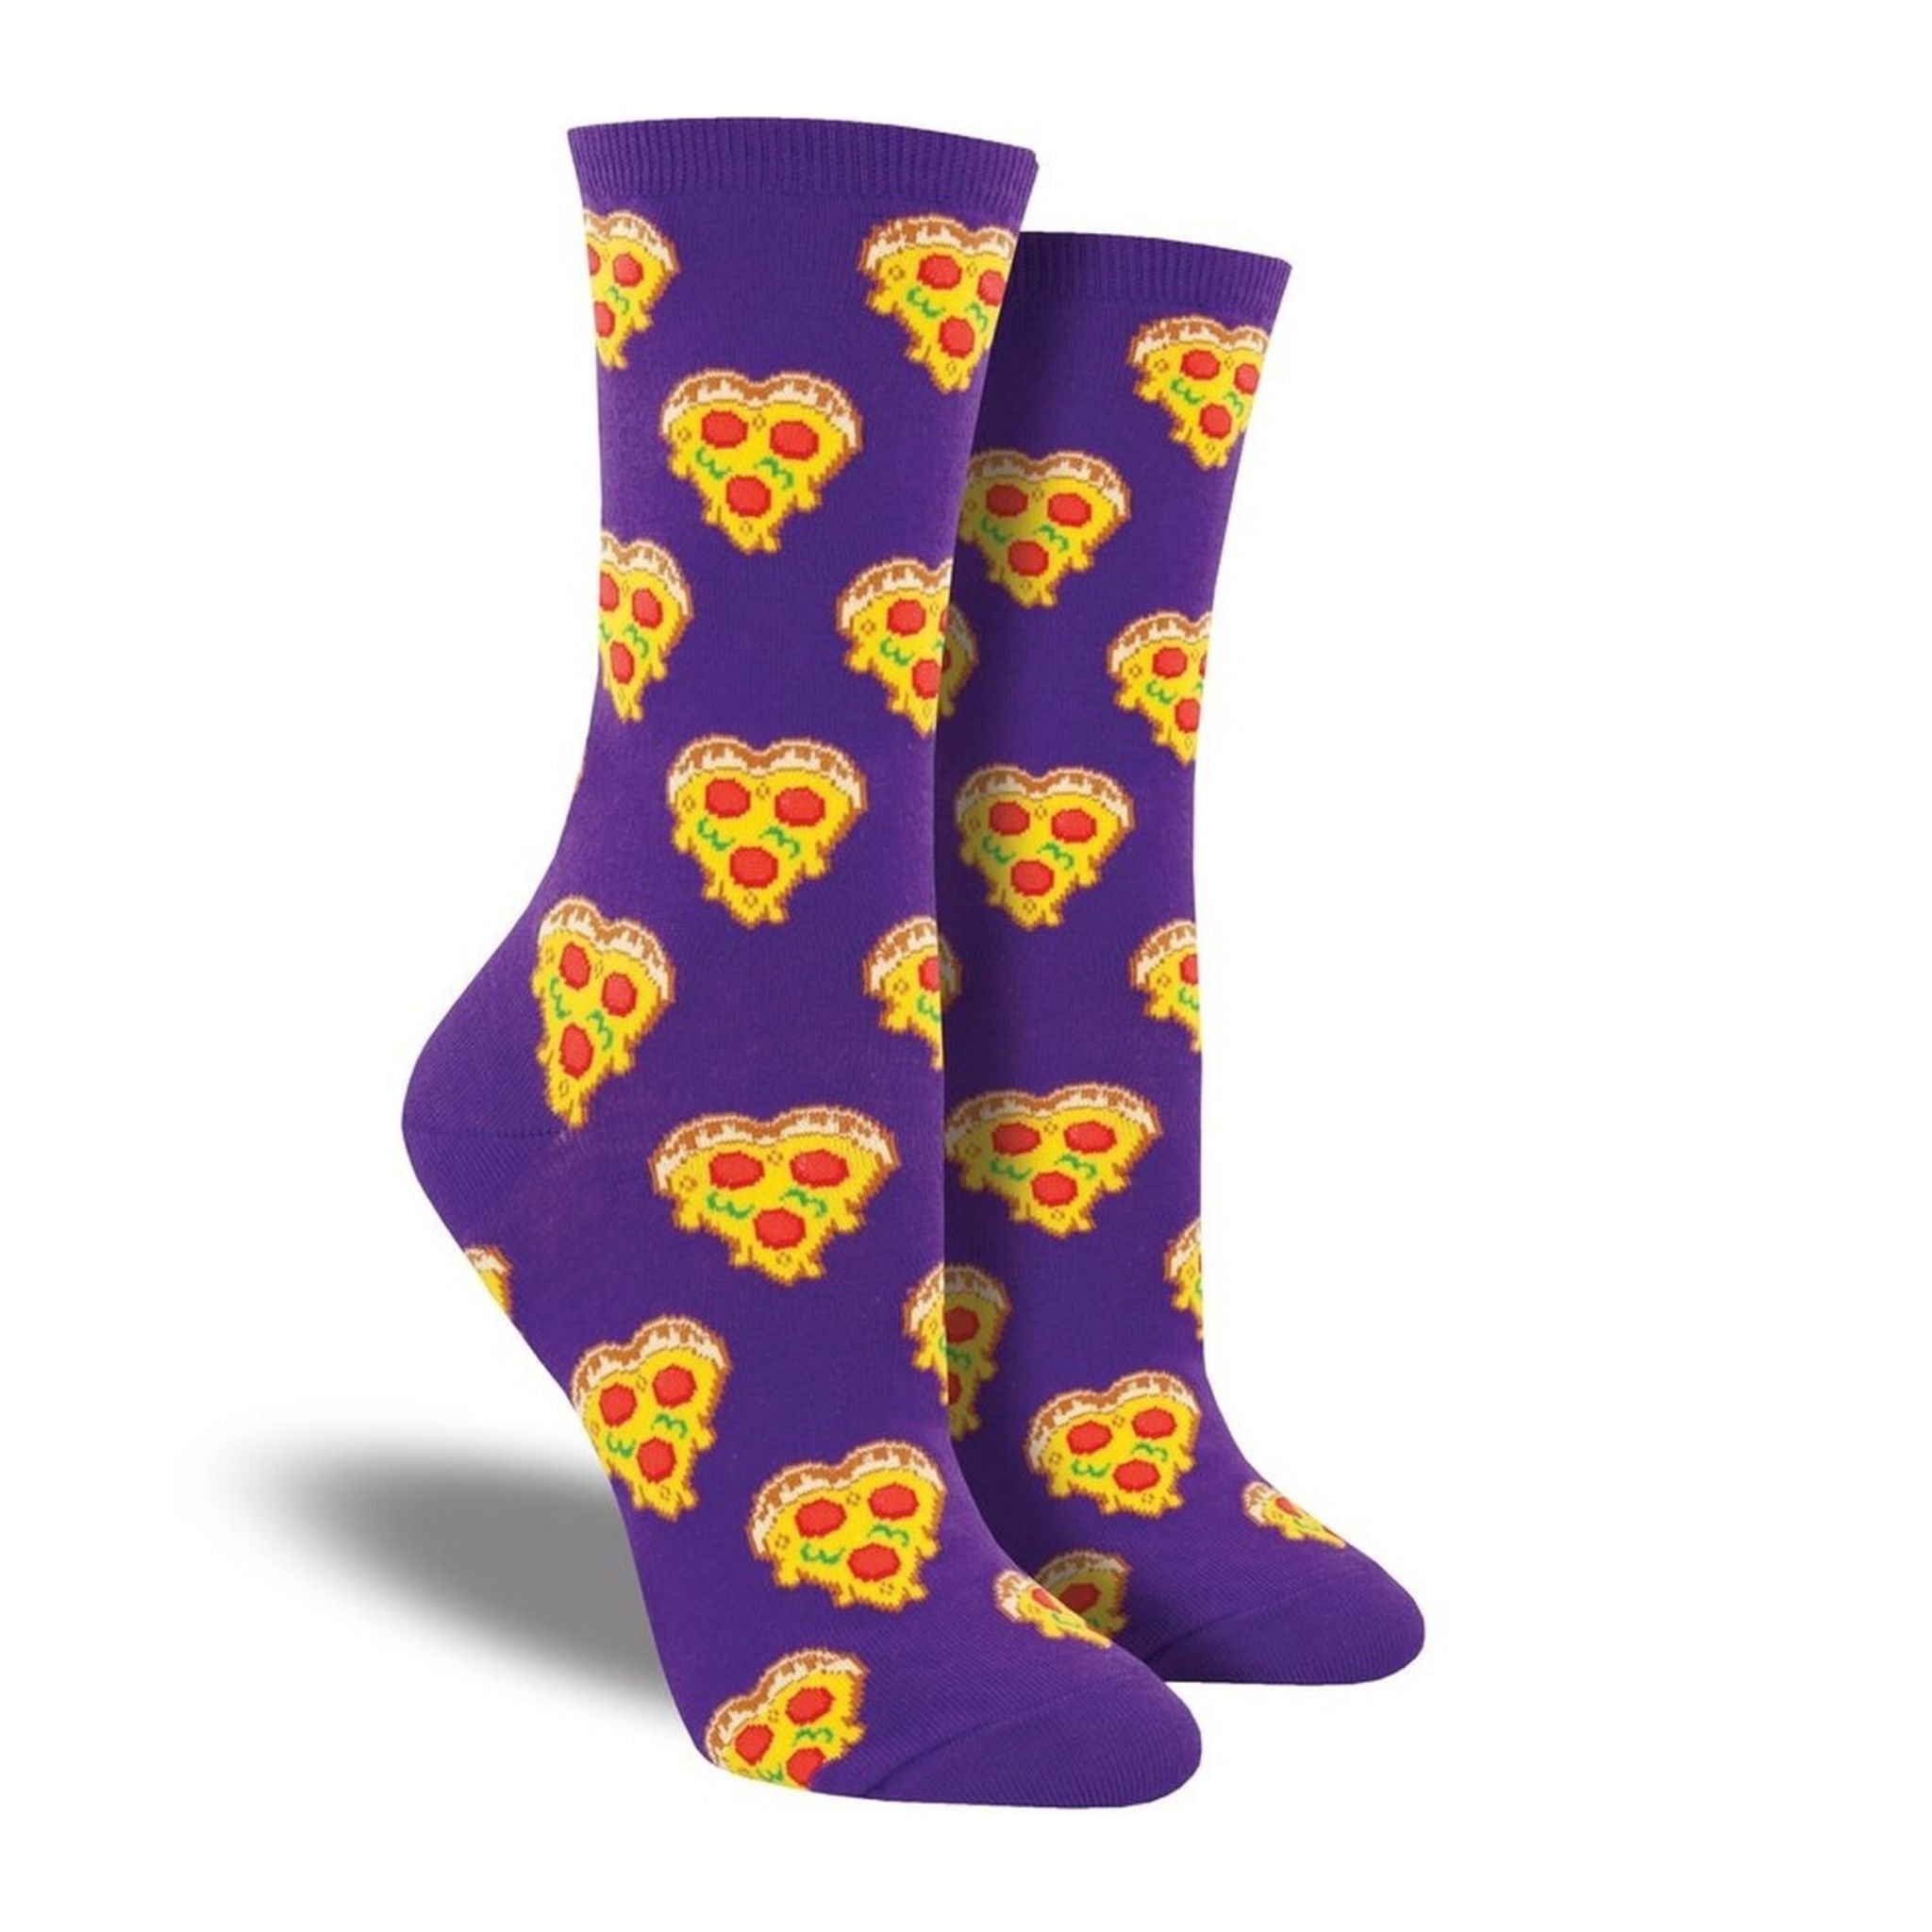 Purple socks with heart shaped pizza slices